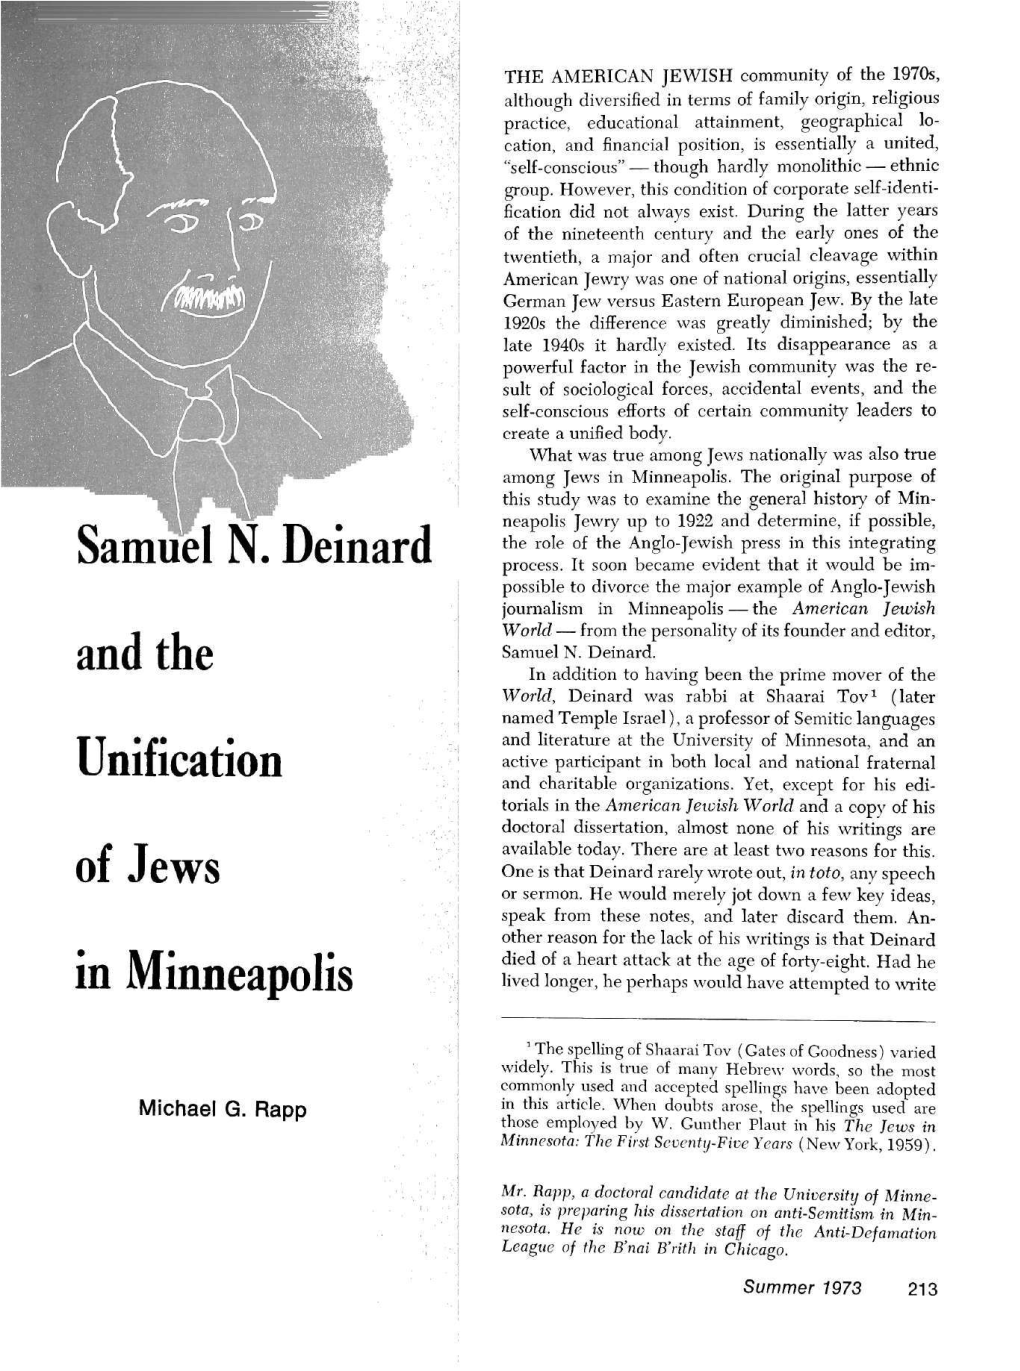 Samuel N. Deinard and the Unification of Jews in Minneapolis / Michael G